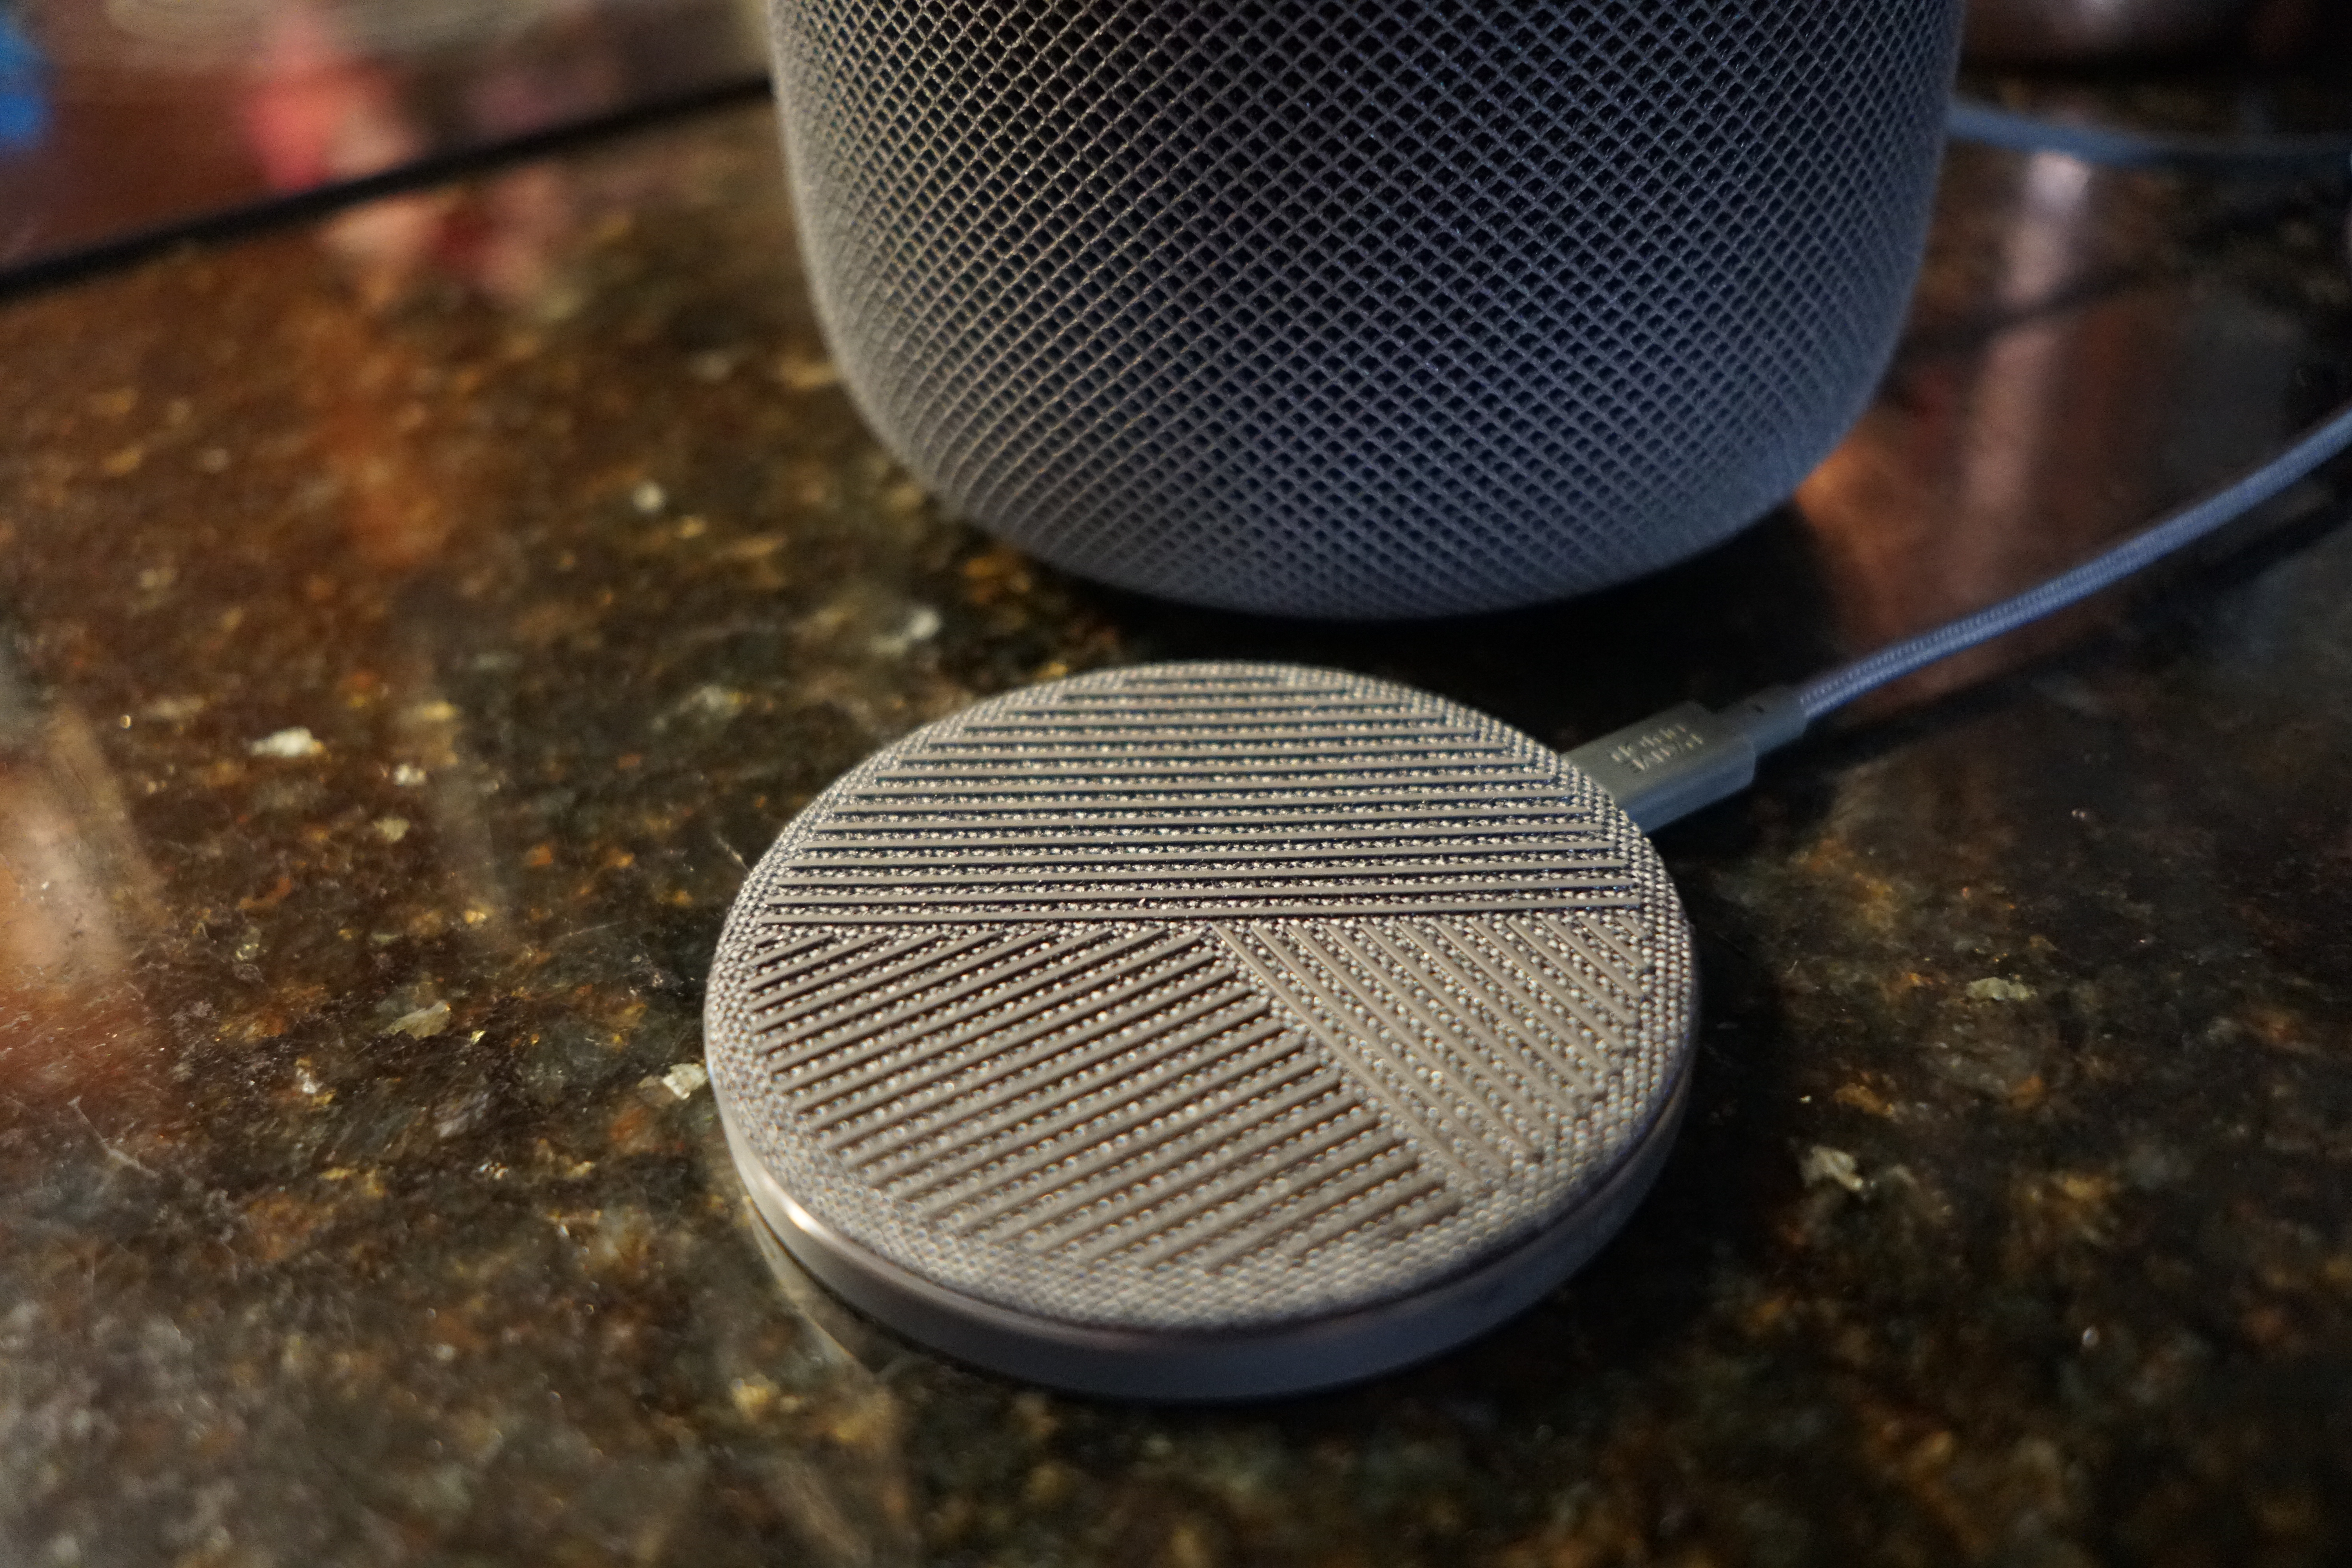 Plantkunde lade plannen Review: Native Union's Drop Wireless Charger for iPhone X and Qi devices  perfectly complements HomePod's design - 9to5Mac